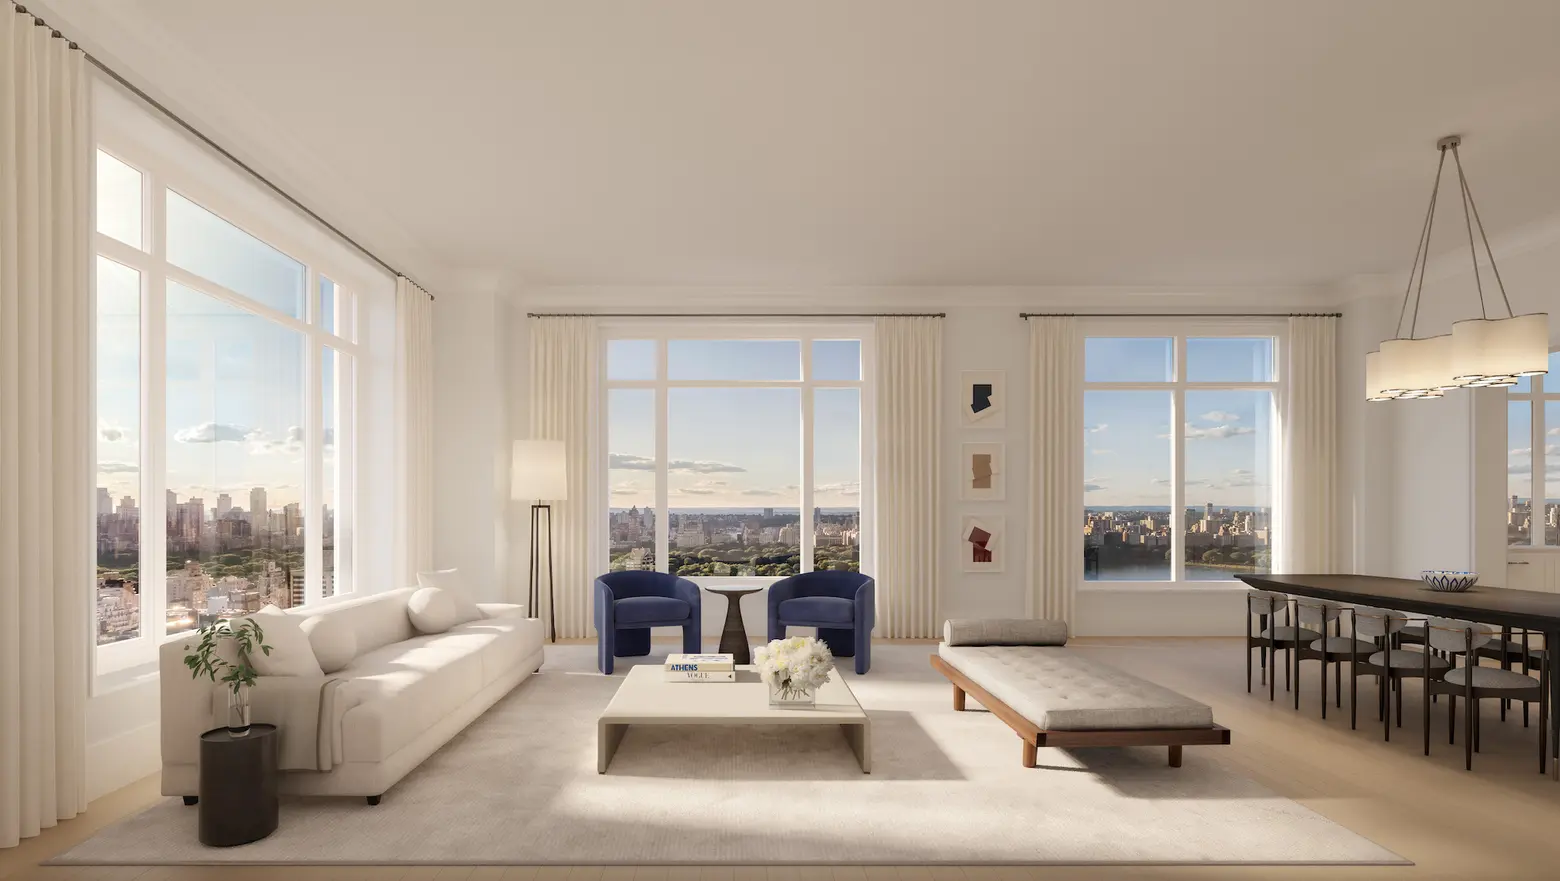 A one-bedroom at Robert A.M. Stern’s new luxury Upper East Side tower asks $2M